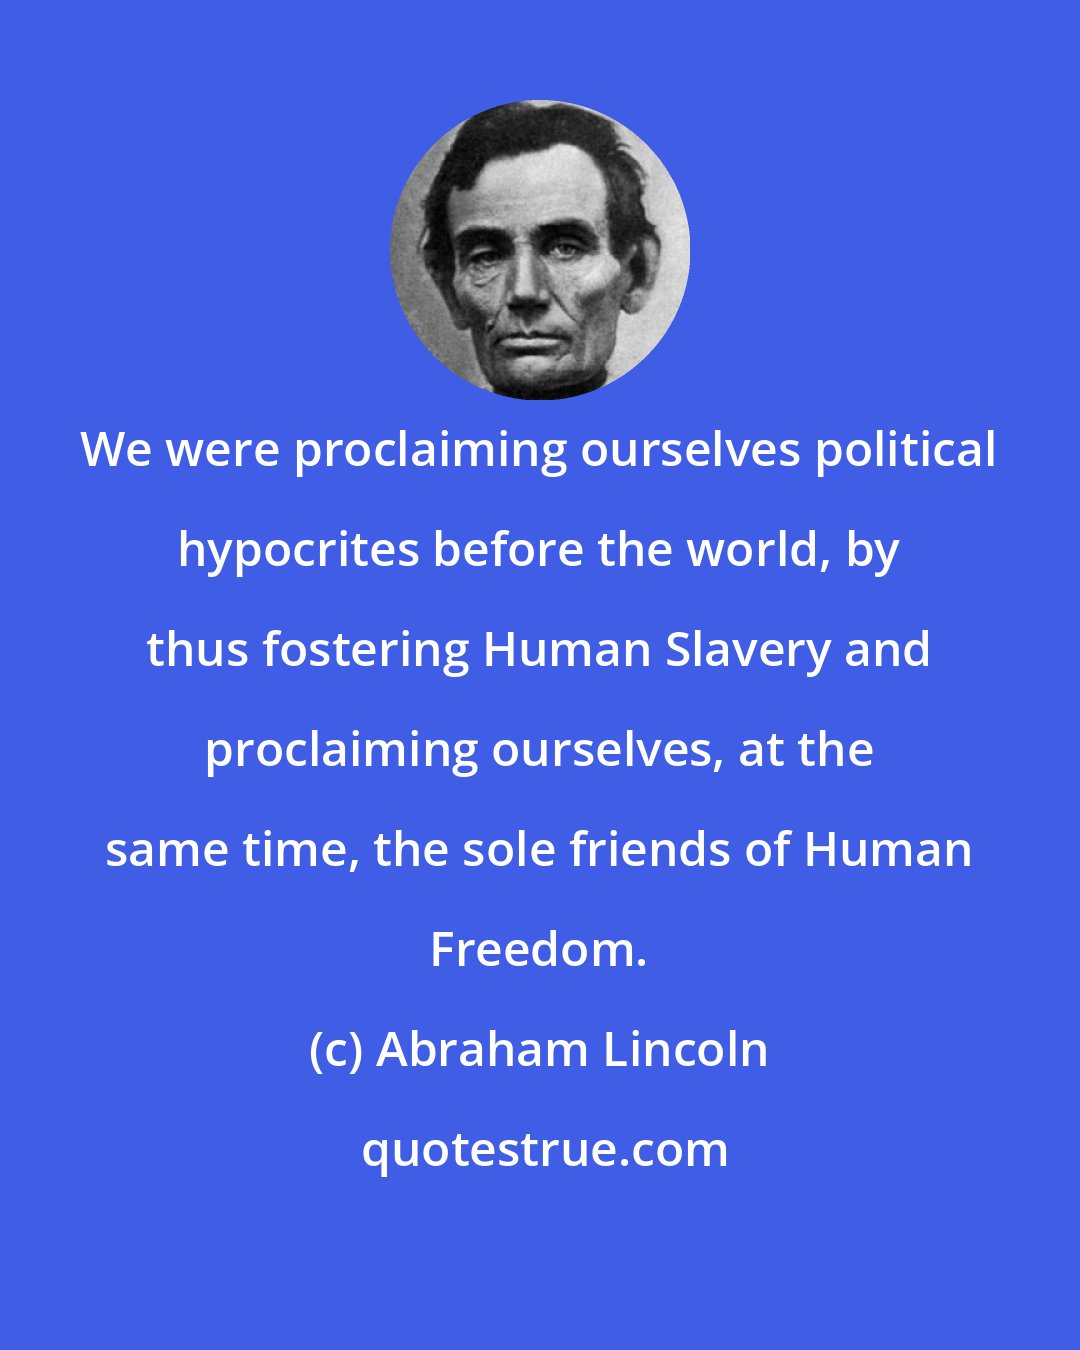 Abraham Lincoln: We were proclaiming ourselves political hypocrites before the world, by thus fostering Human Slavery and proclaiming ourselves, at the same time, the sole friends of Human Freedom.